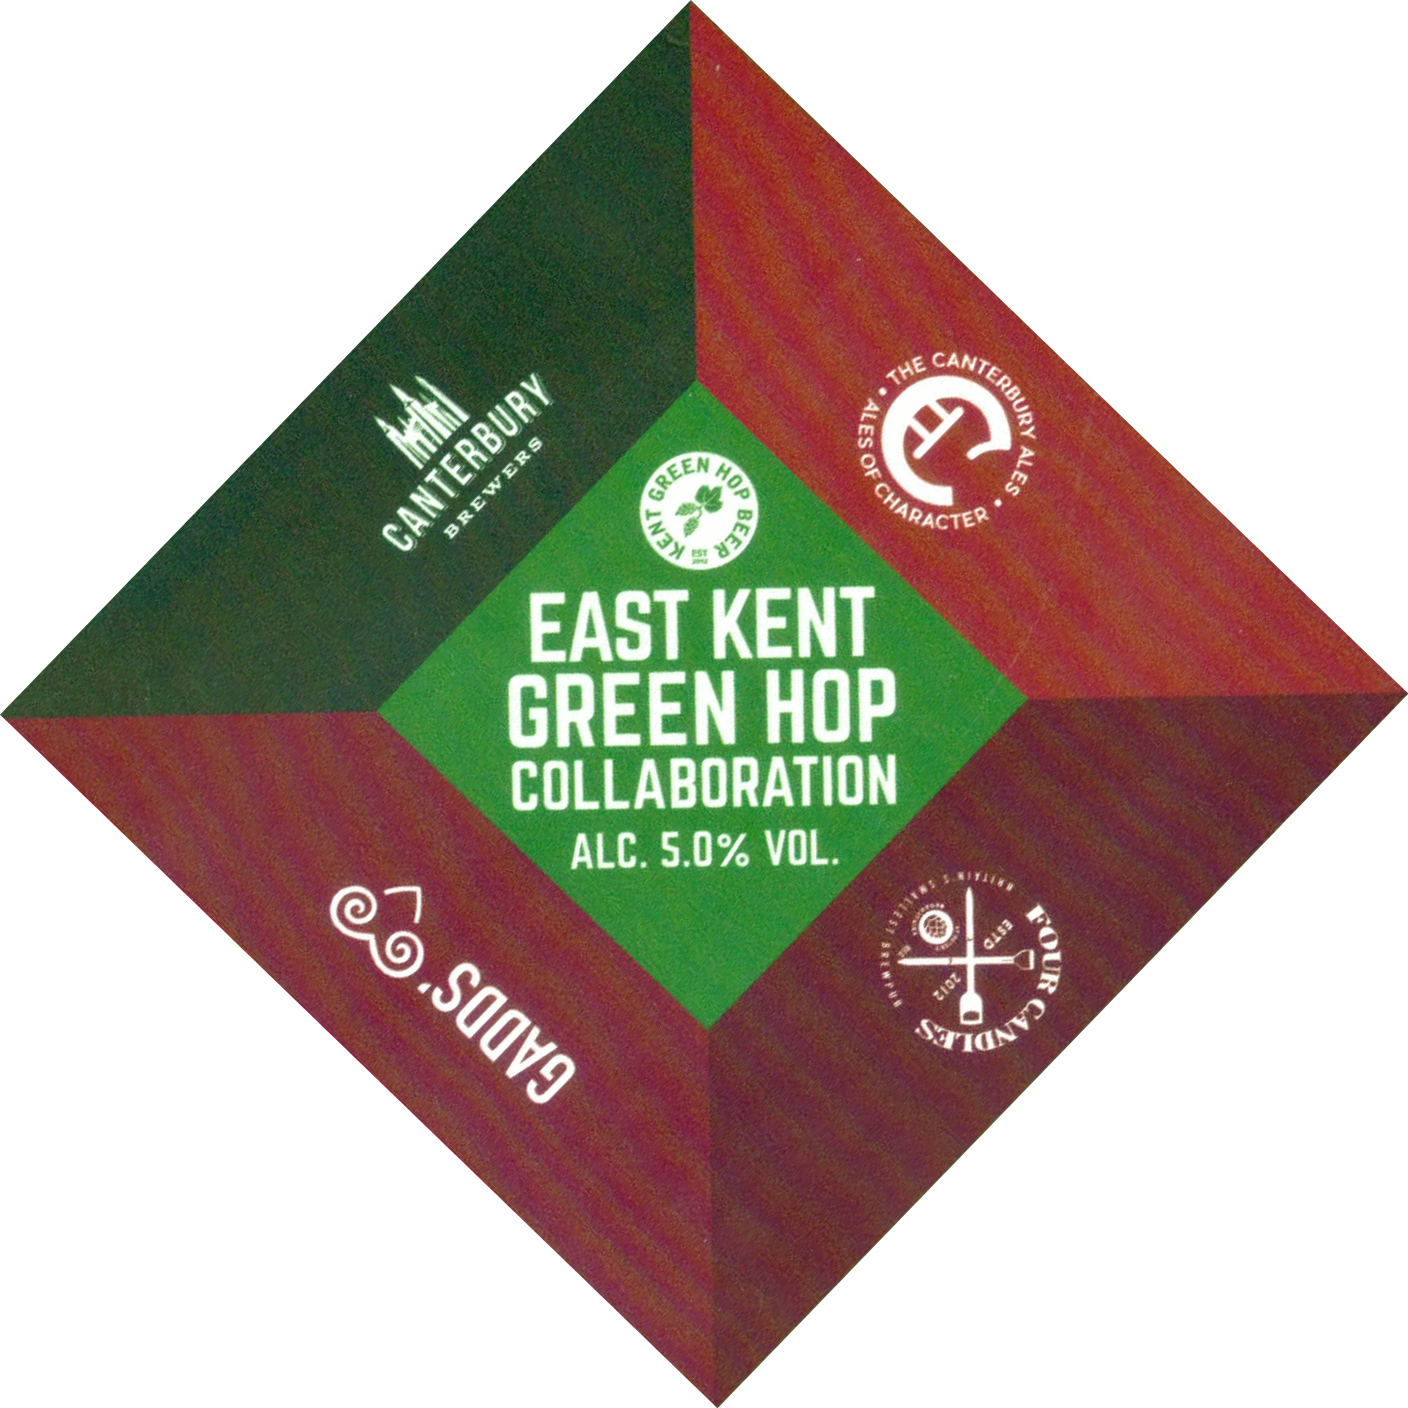 East Kent Green Hop Collaboration (2019) - Gadds, Four Candles, Canterbury Ales and Canterbury Brewers